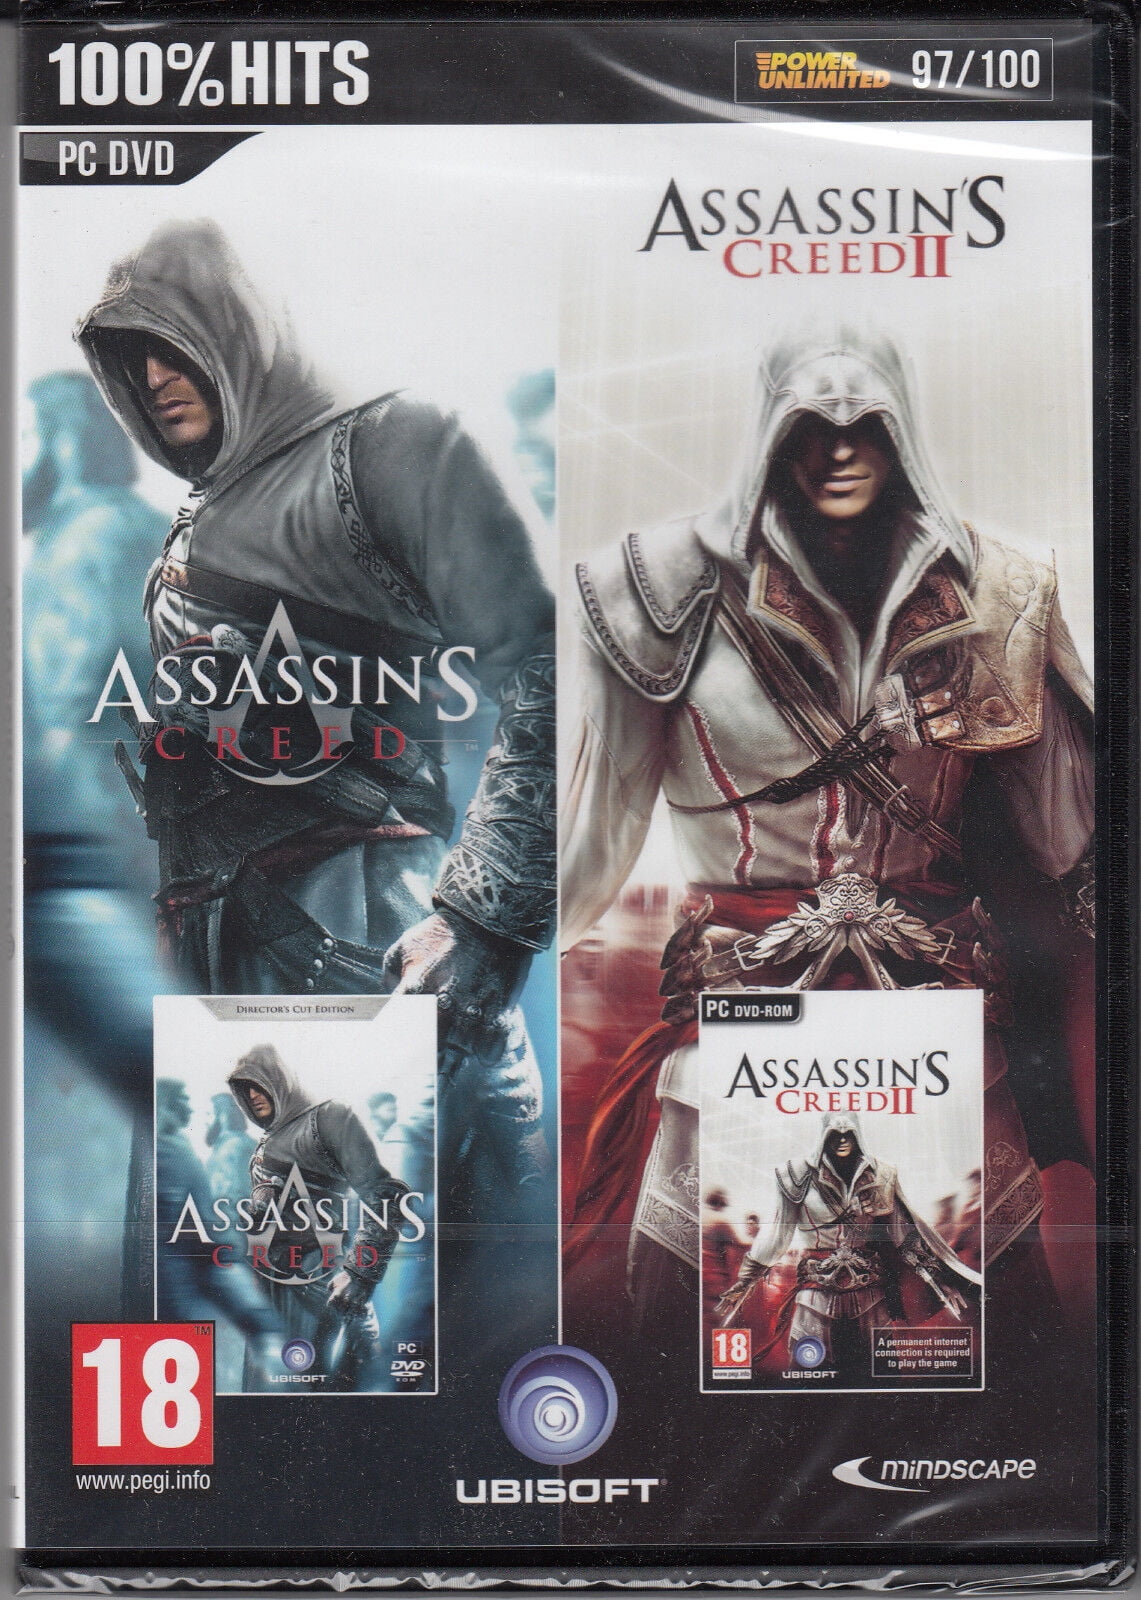 Assassin's Creed I & II PC Collection Double Pack Brand New Sealed ...